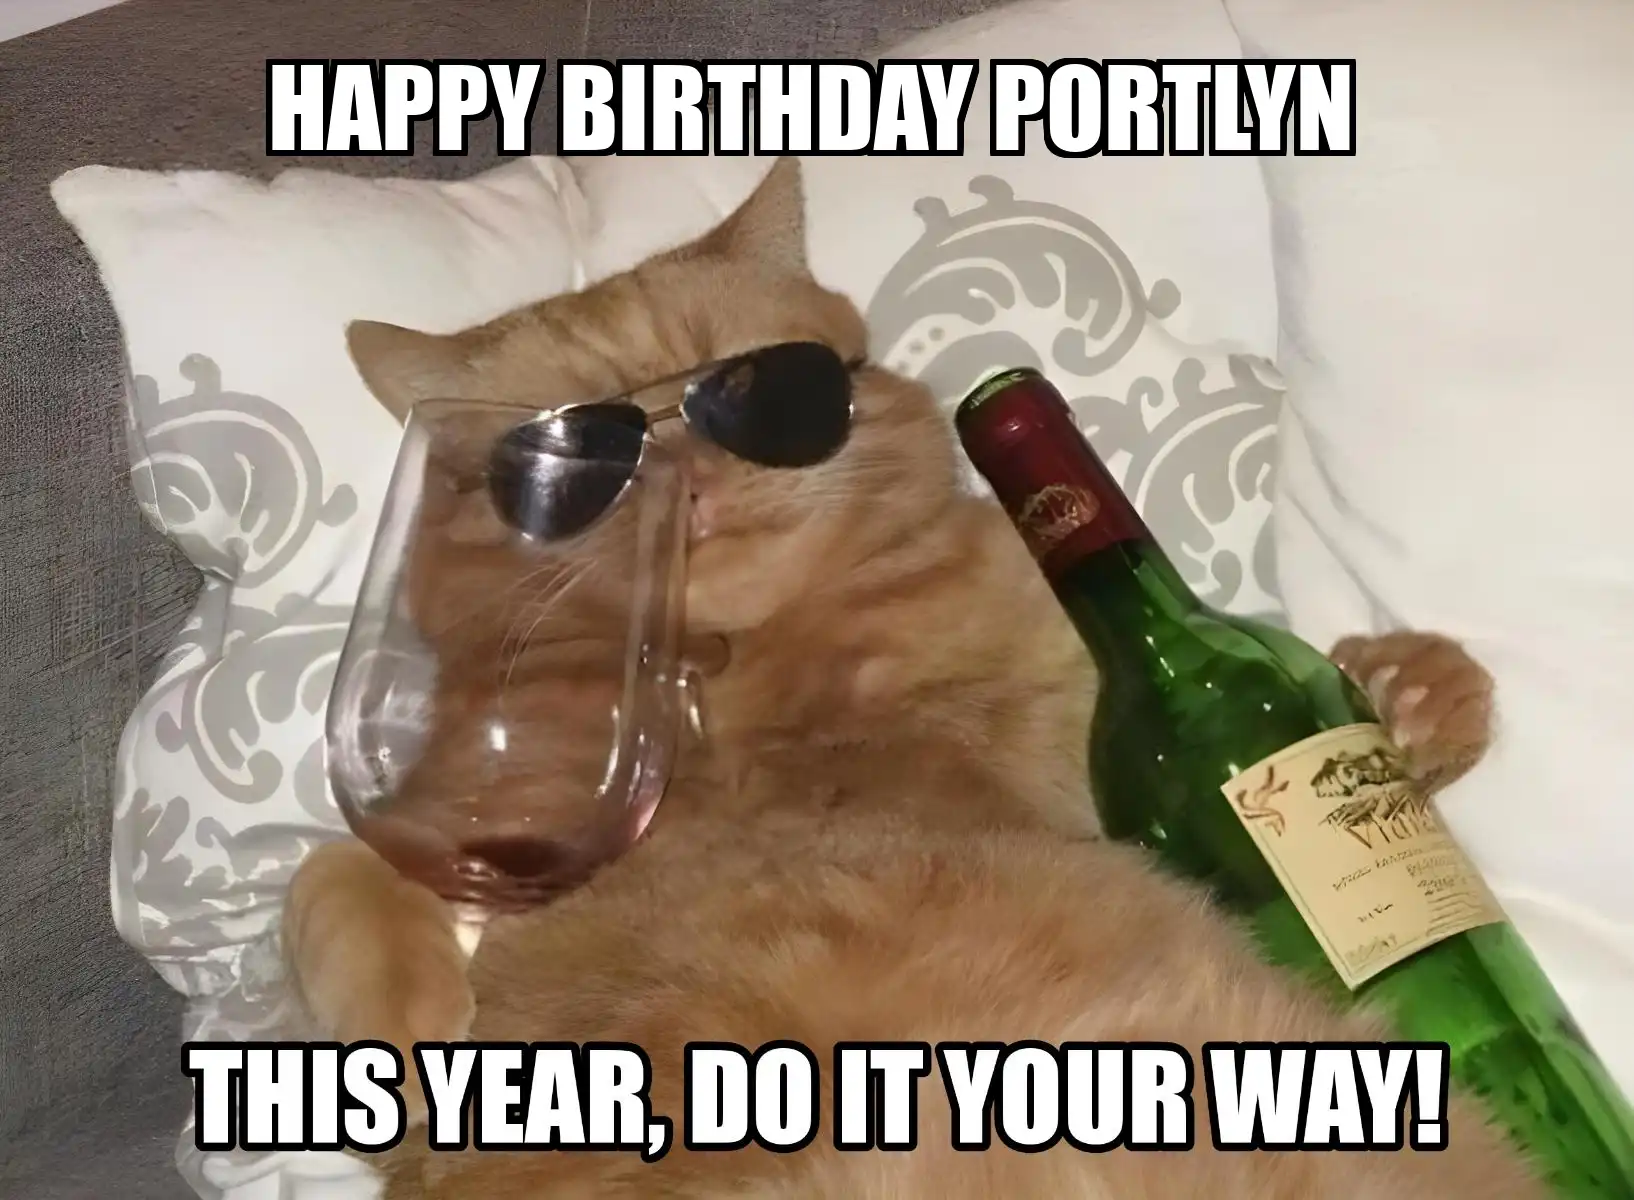 Happy Birthday Portlyn This Year Do It Your Way Meme